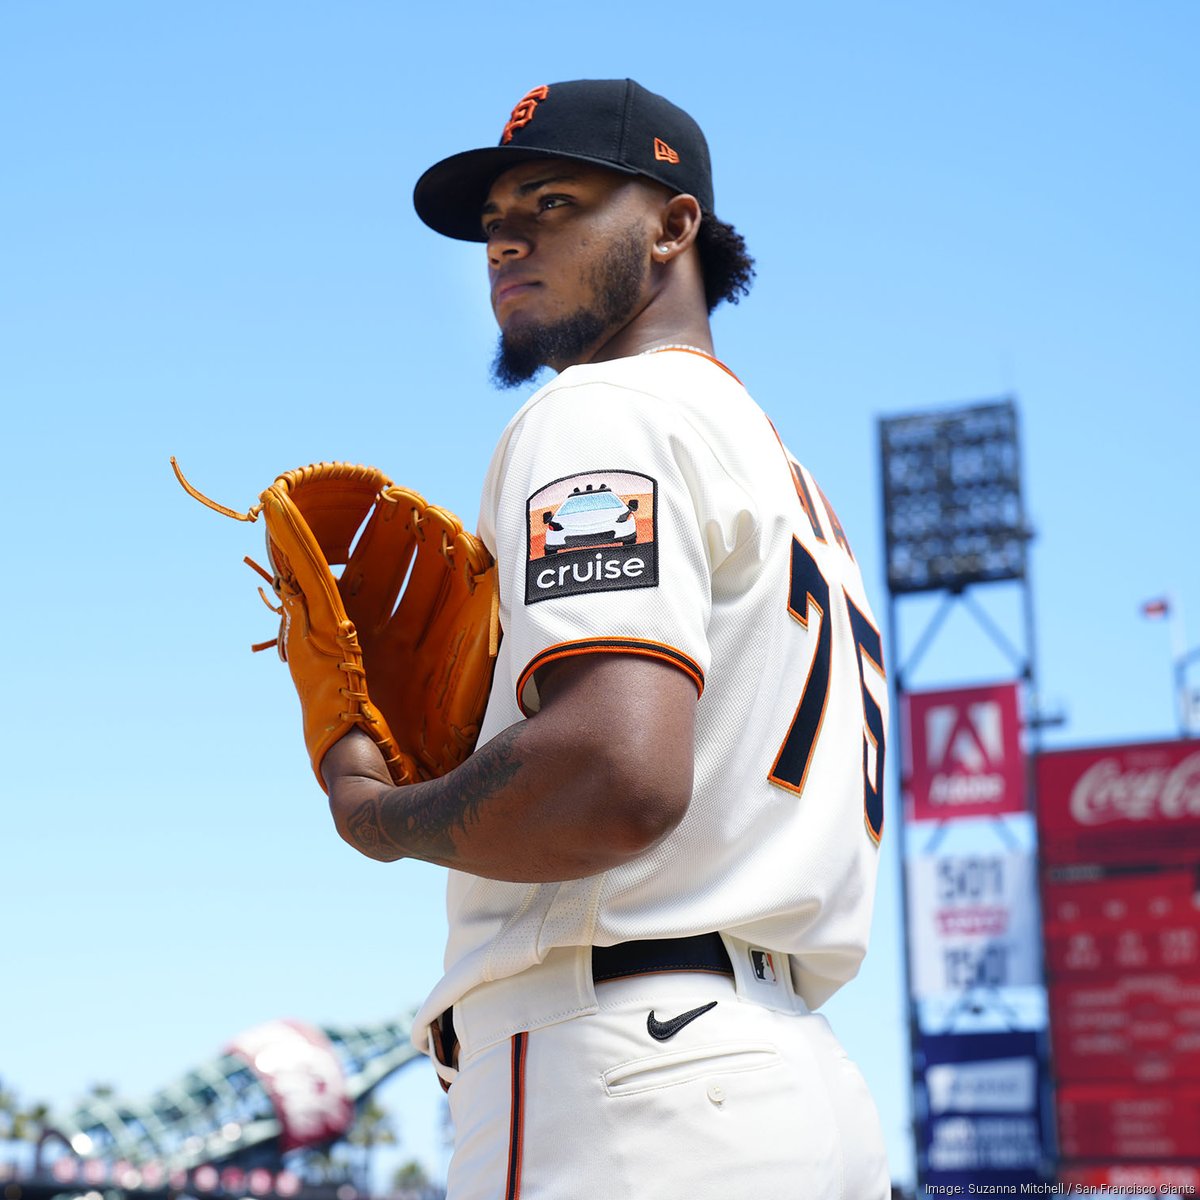 San Francisco Giants drive uniform patch deal with Cruise